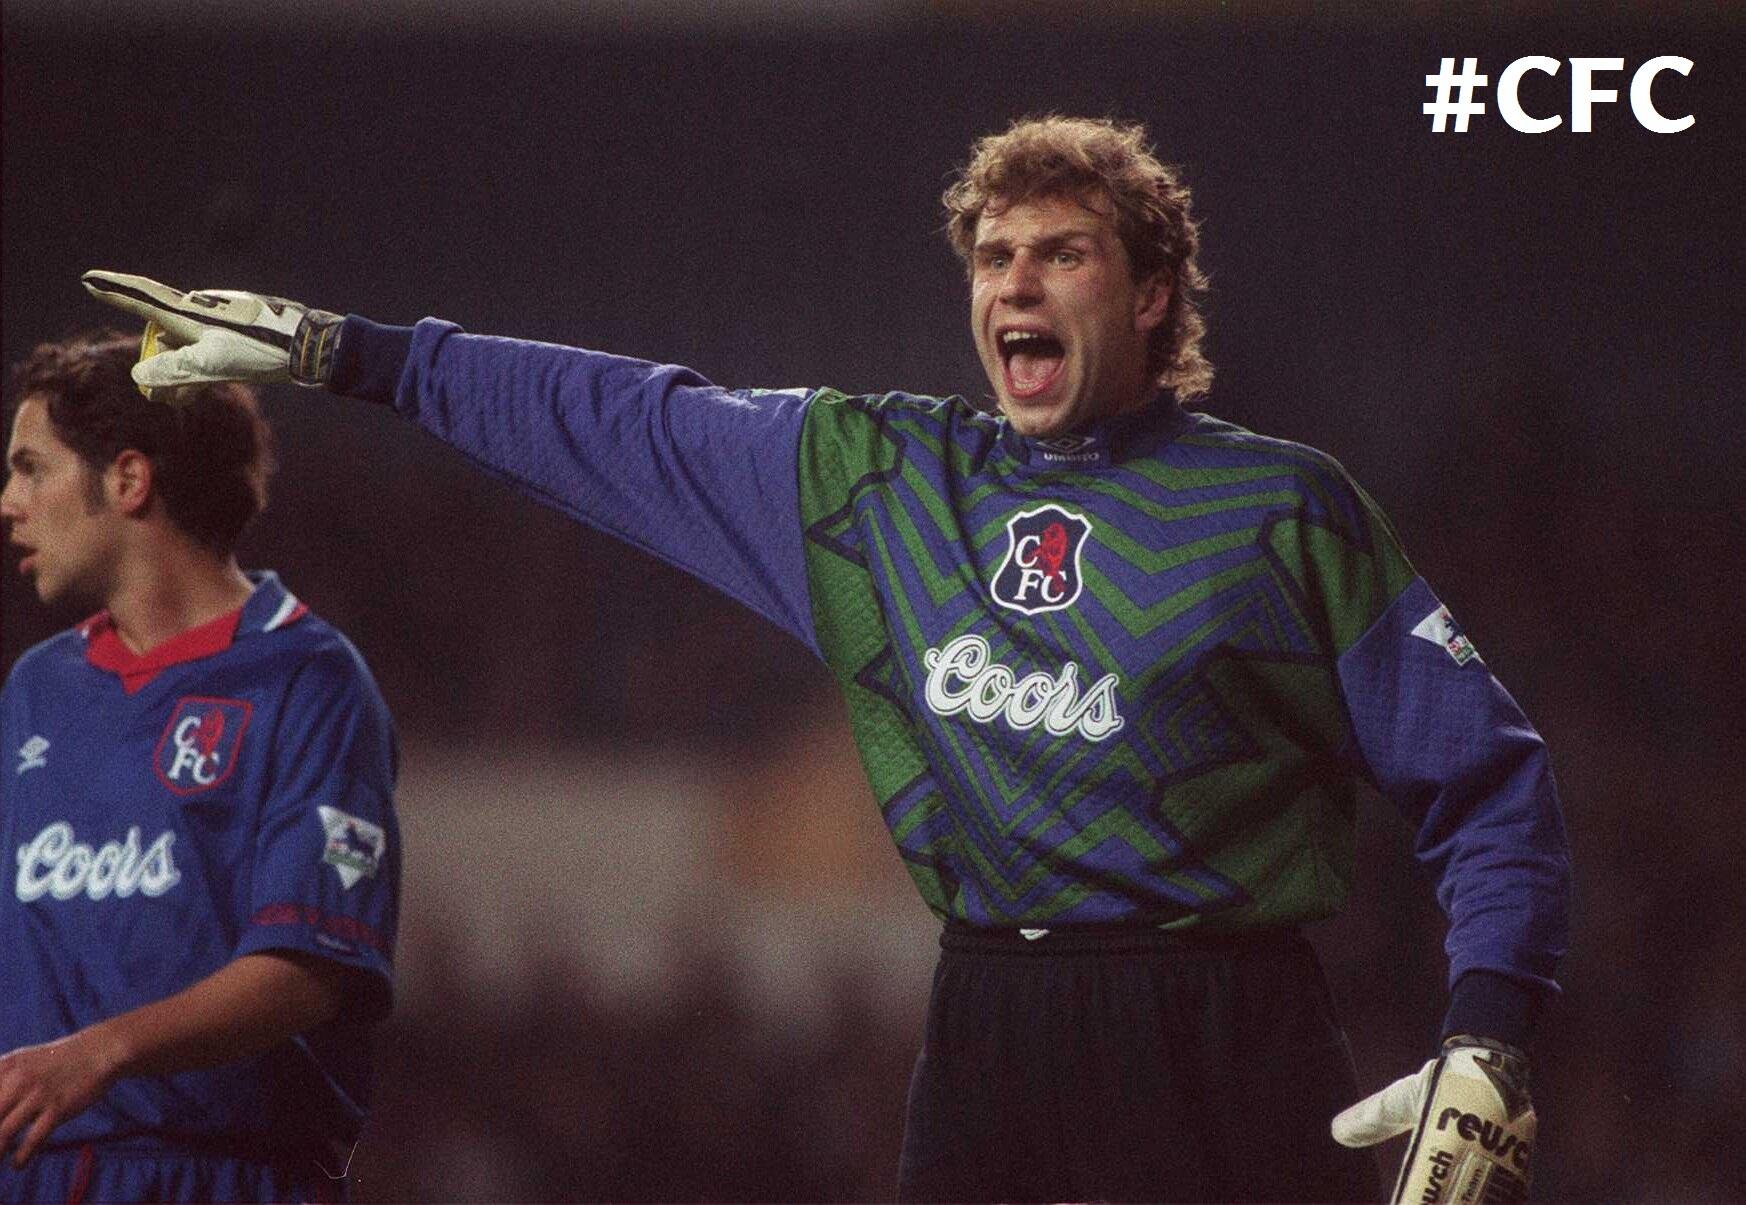 Chelsea FC on Twitter: "Talking of goalkeepers, Dmitri Kharine made his debut for @chelseafc on this day back in 1993! #CFC http://t.co/bWNHDMNaIJ" / Twitter